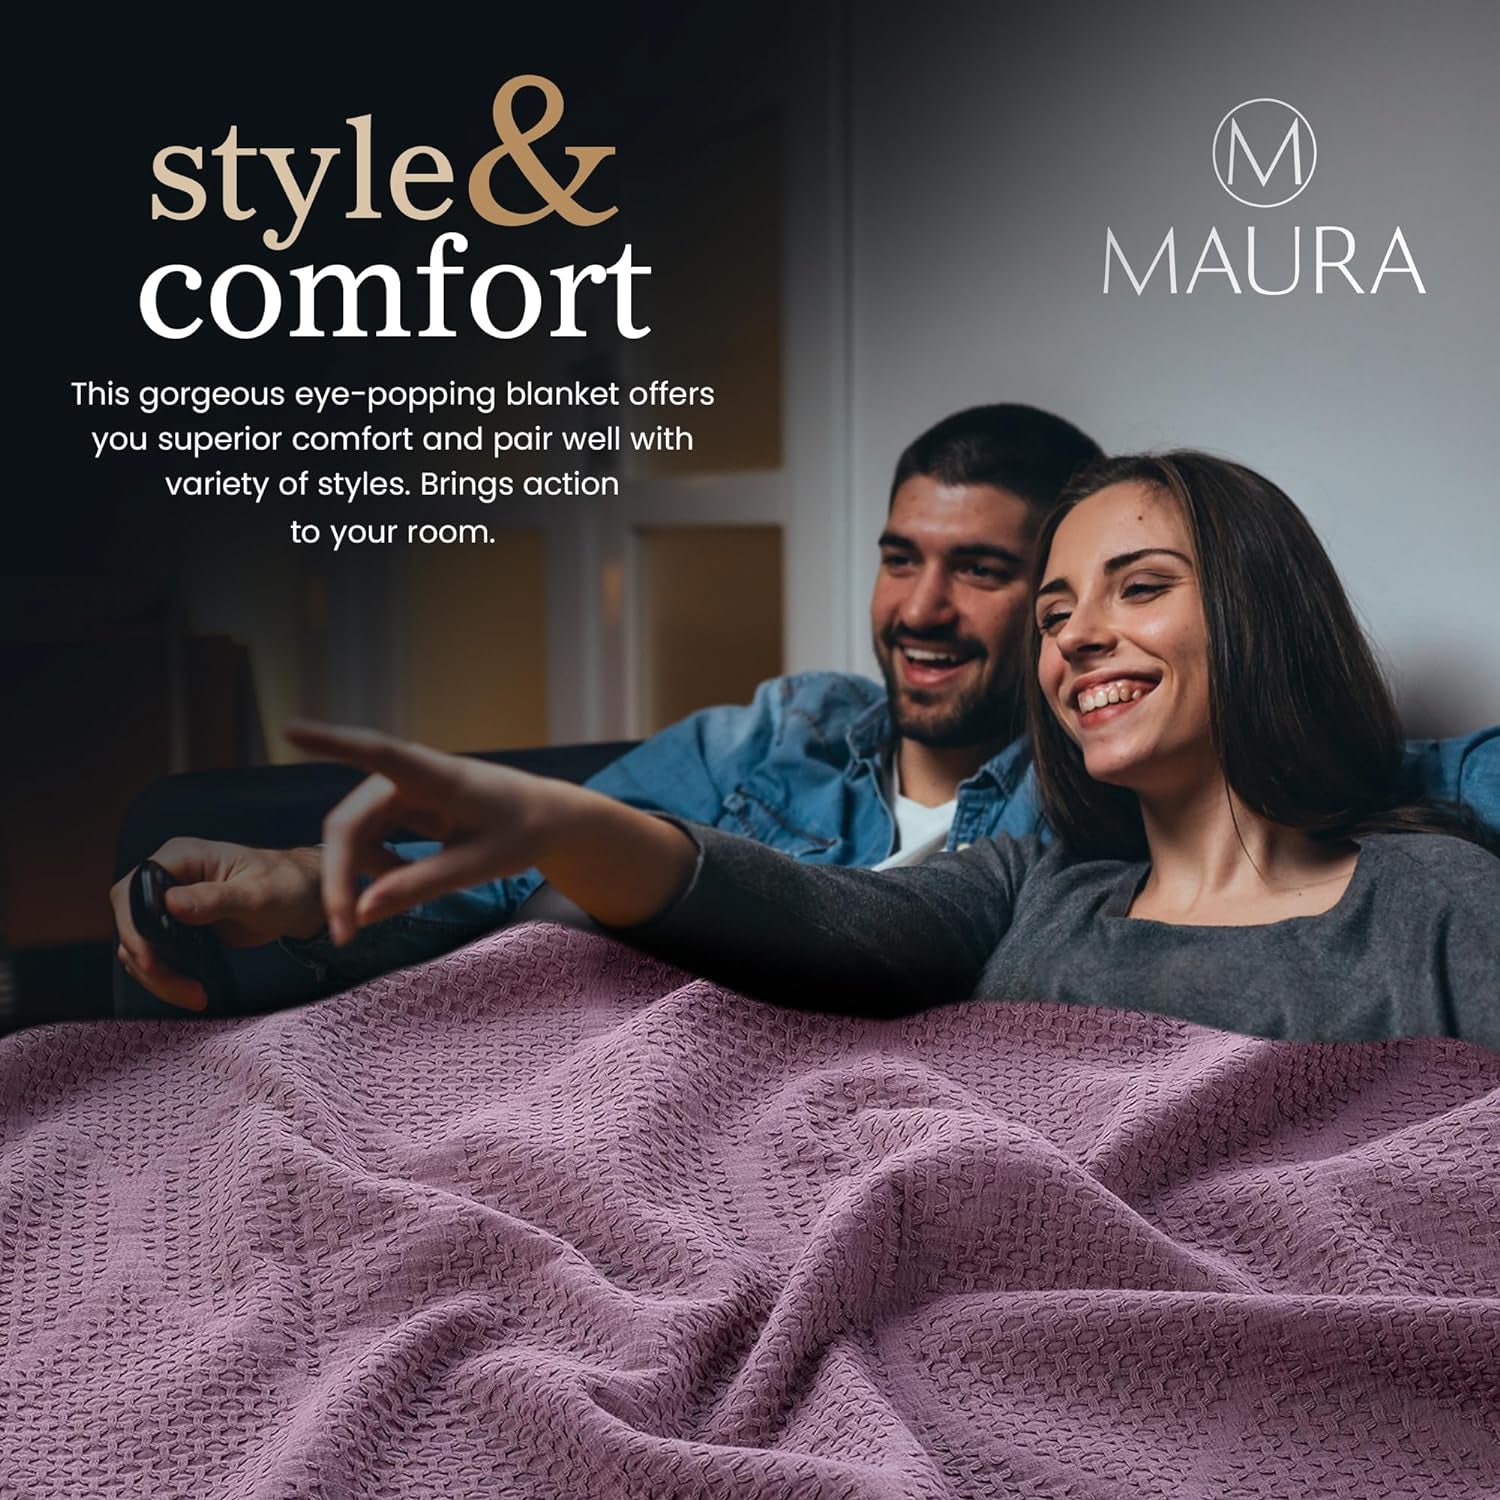 Thin Lightweight Cotton Blankets Skin-Friendly, Breathable, and Fade-Resistant - Modern Bedding Essentials for Year-Round Comfort, Style, and Quality Sleep Experience. King Large 108”X 90”-Plum